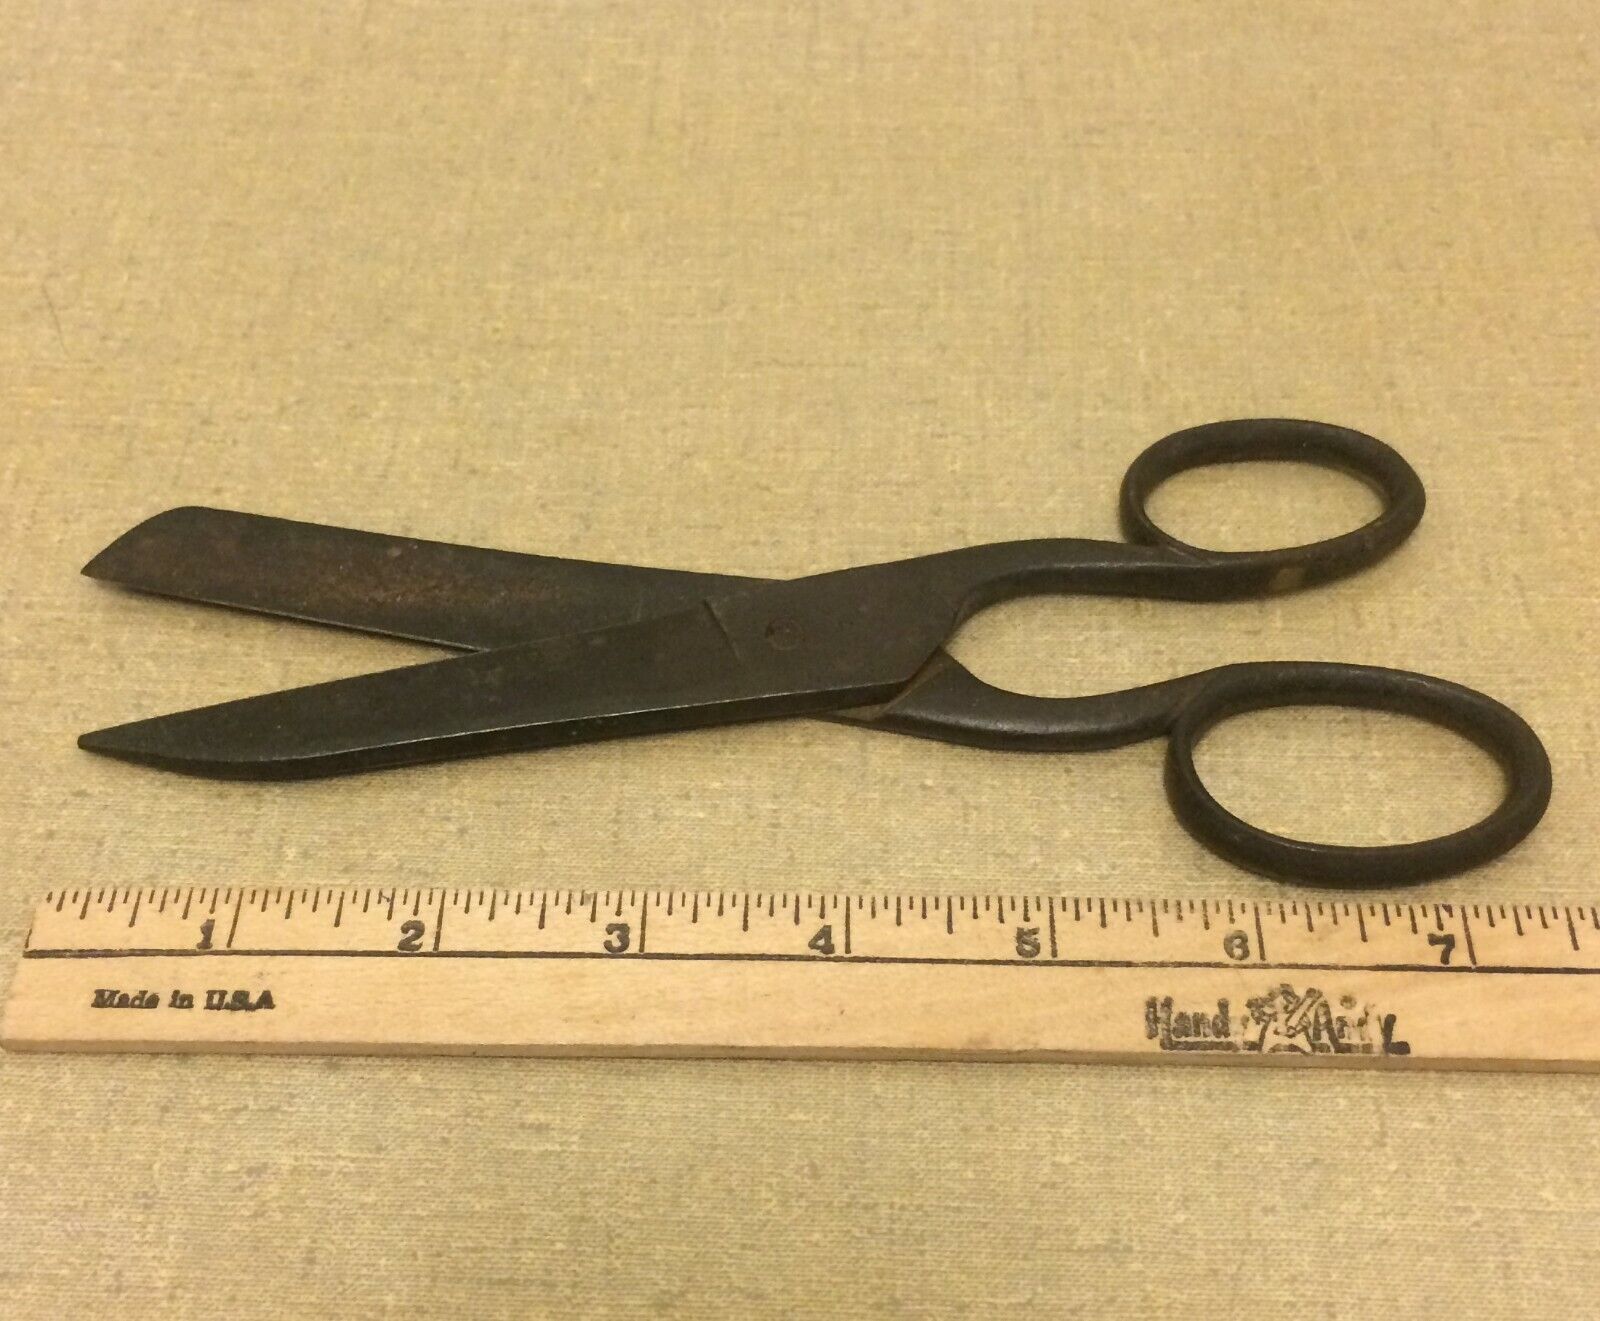 ANTIQUE TAILORS SCISSORS HAND SHEARS AS FOUND